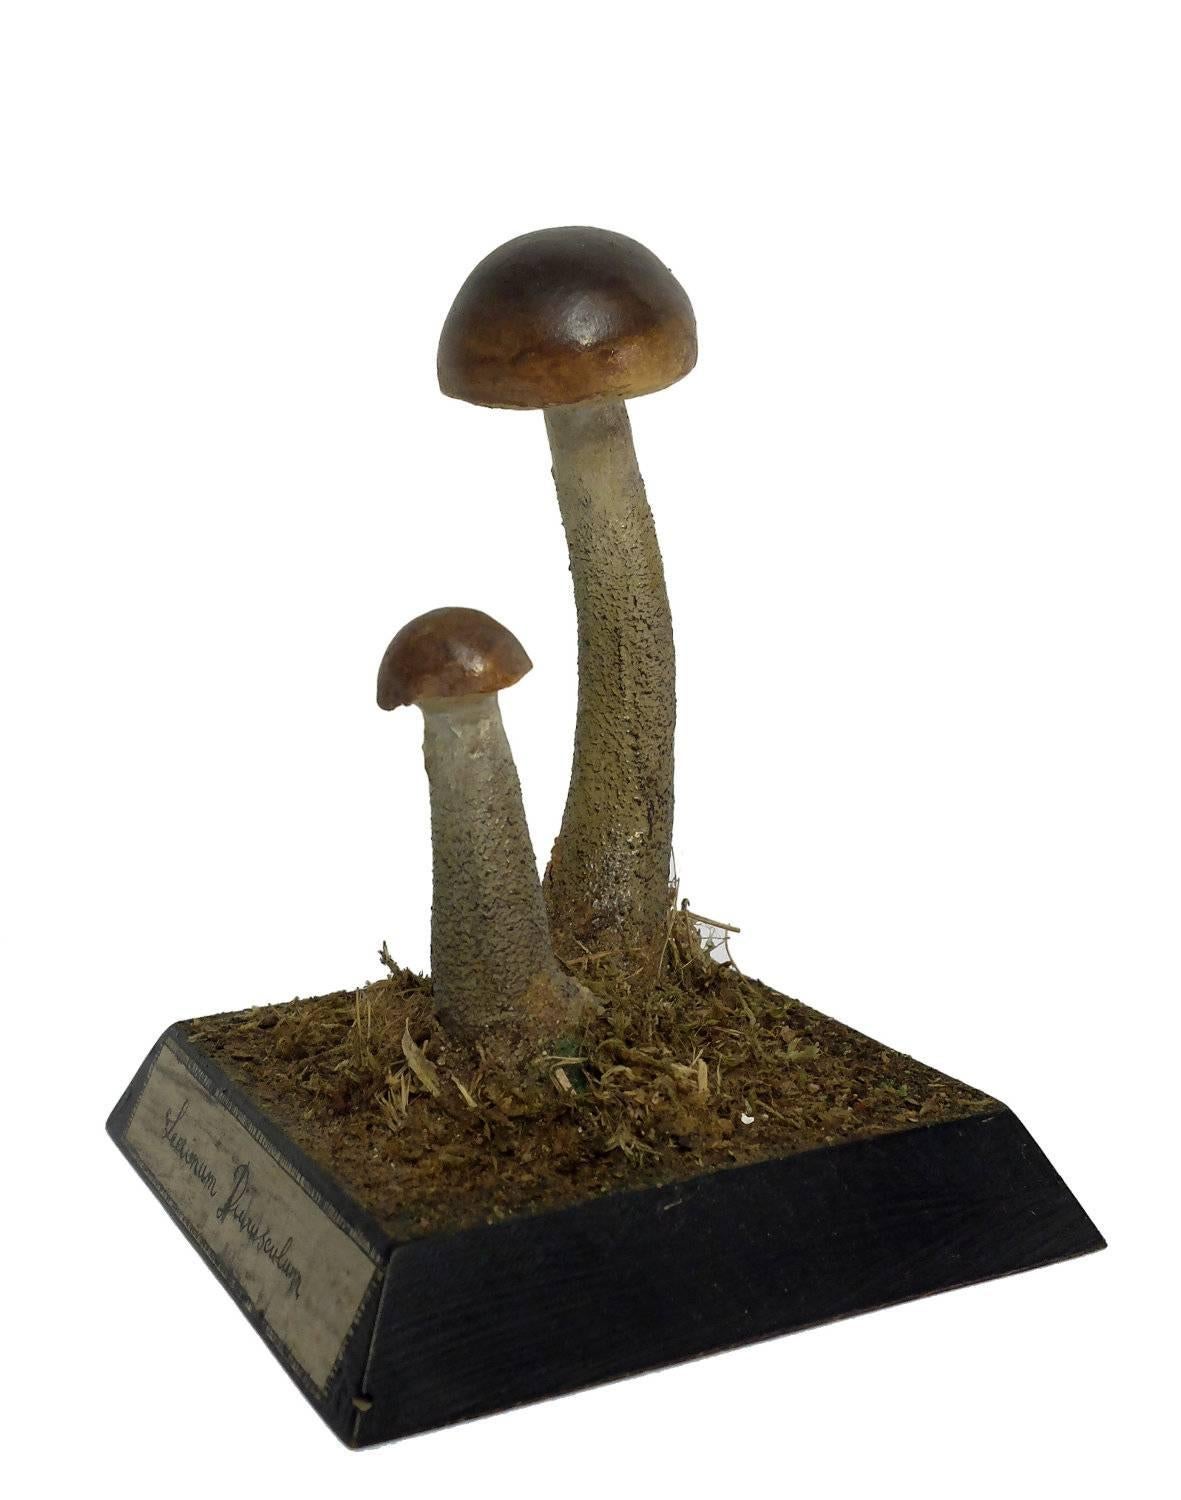 A model for the pharmacy of two mushroom specimens of Leinium Diurusculum. Made out of plaster watercolored. Square wooden black base with moss and hay. It shows on the front one label with the scientific name of the specimen handwritten with ink.